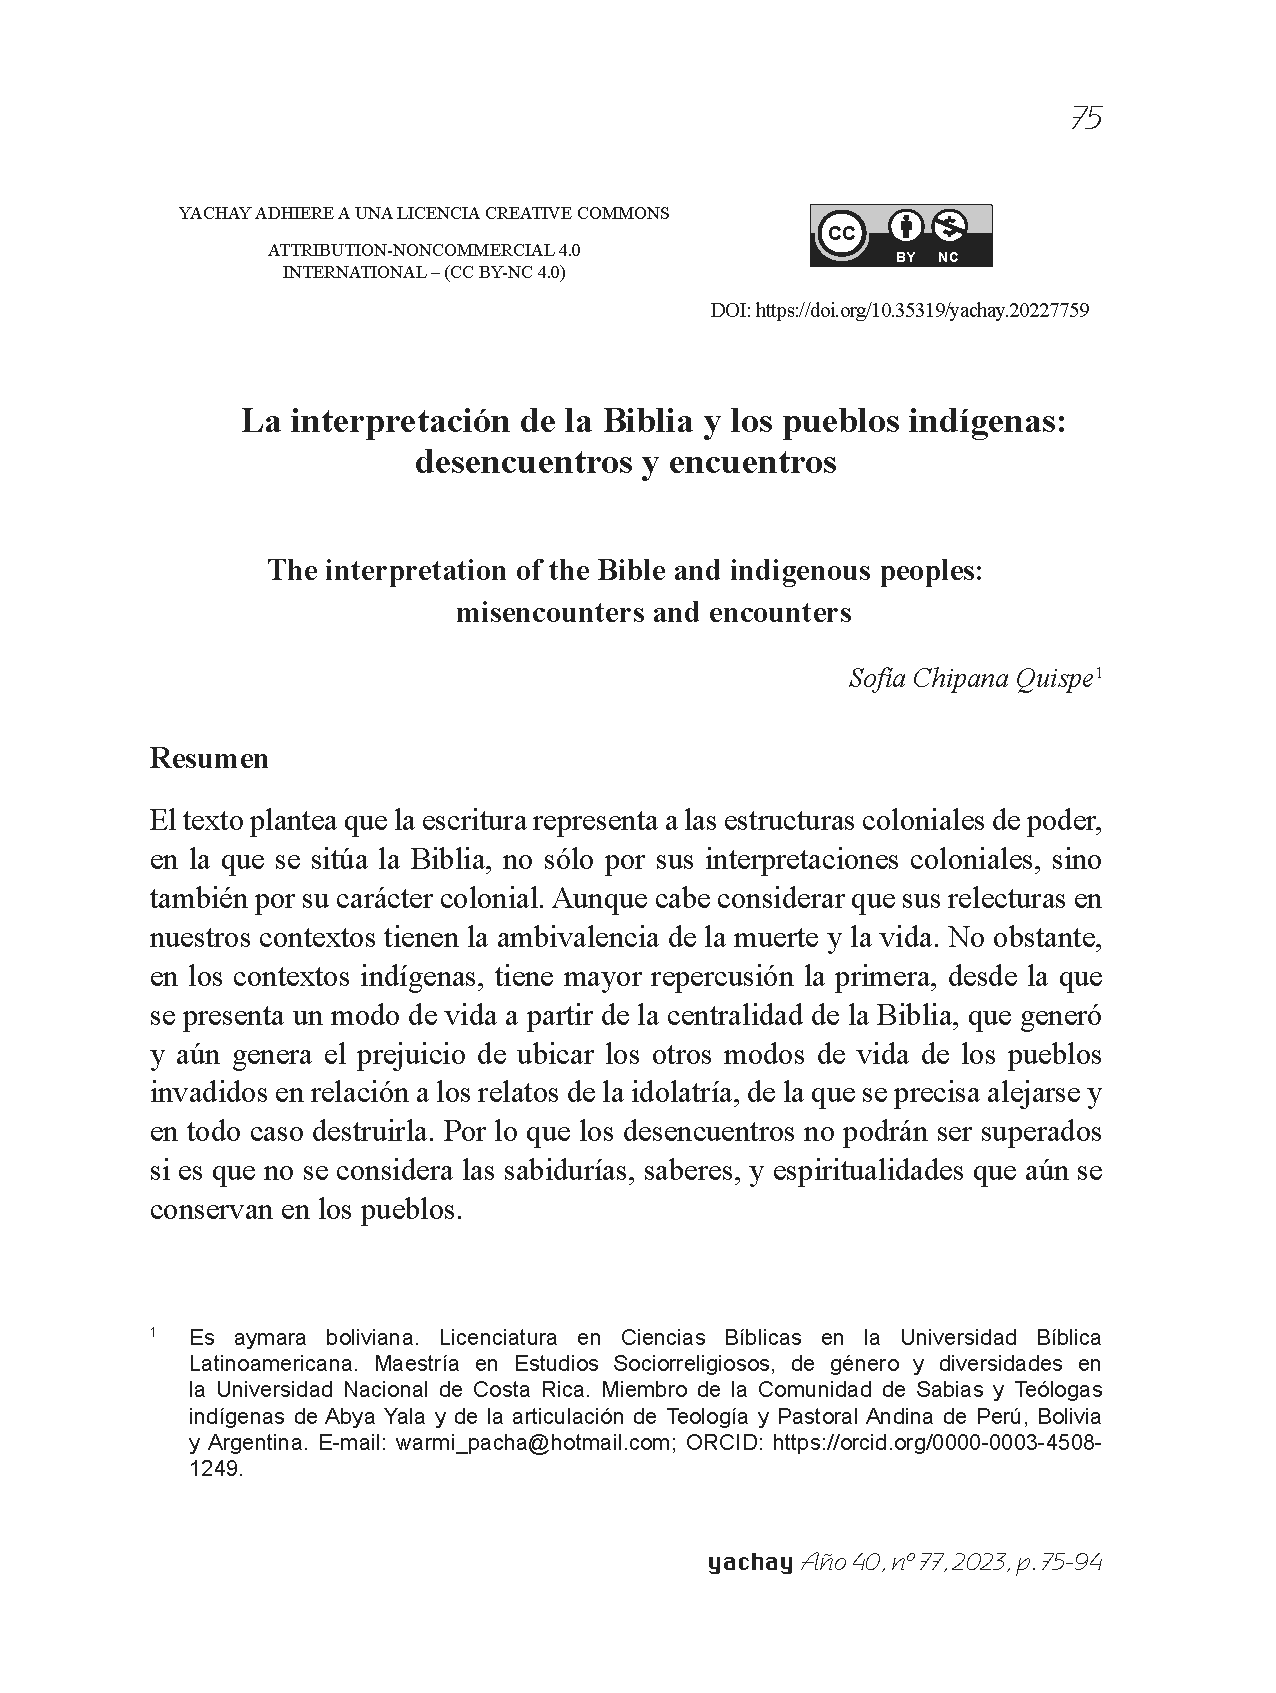 The interpretation of the Bible and indigenous peoples: misencounters and encounters